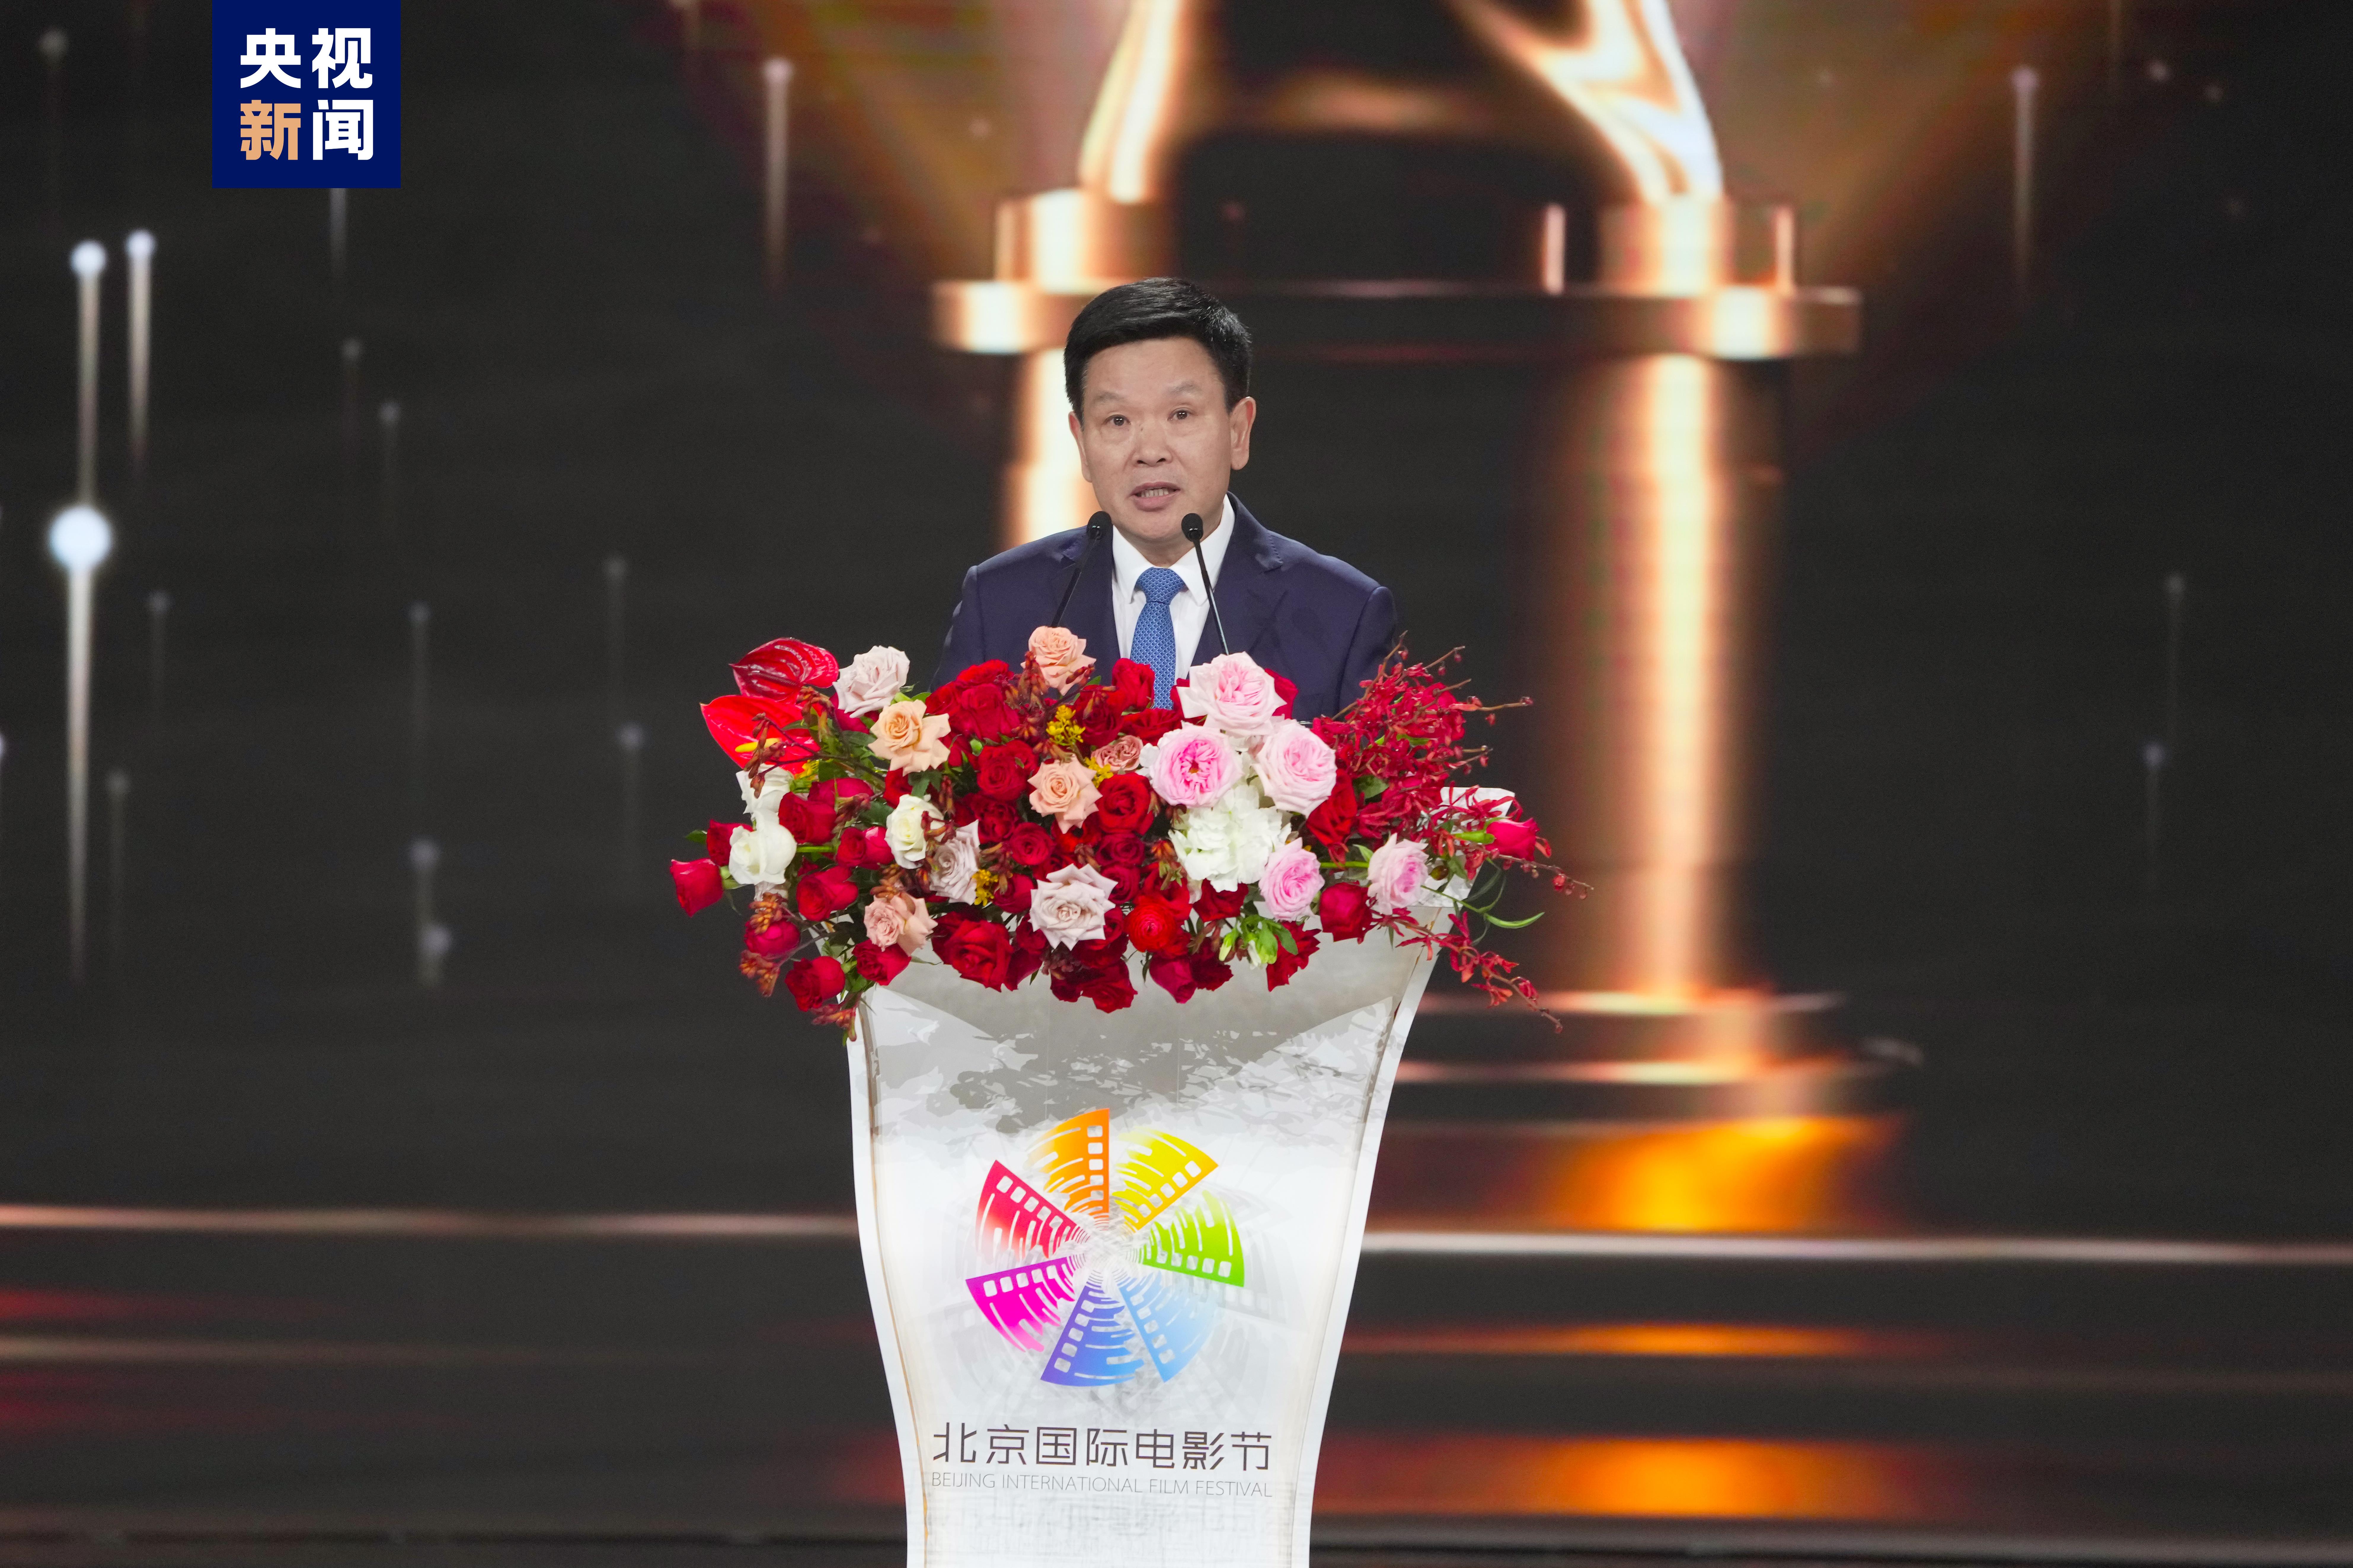 Mo Gaoyi, a member of the Standing Committee of the Communist Party of China (CPC) Beijing Municipal Committee, delivers a speech at the opening event. /CMG